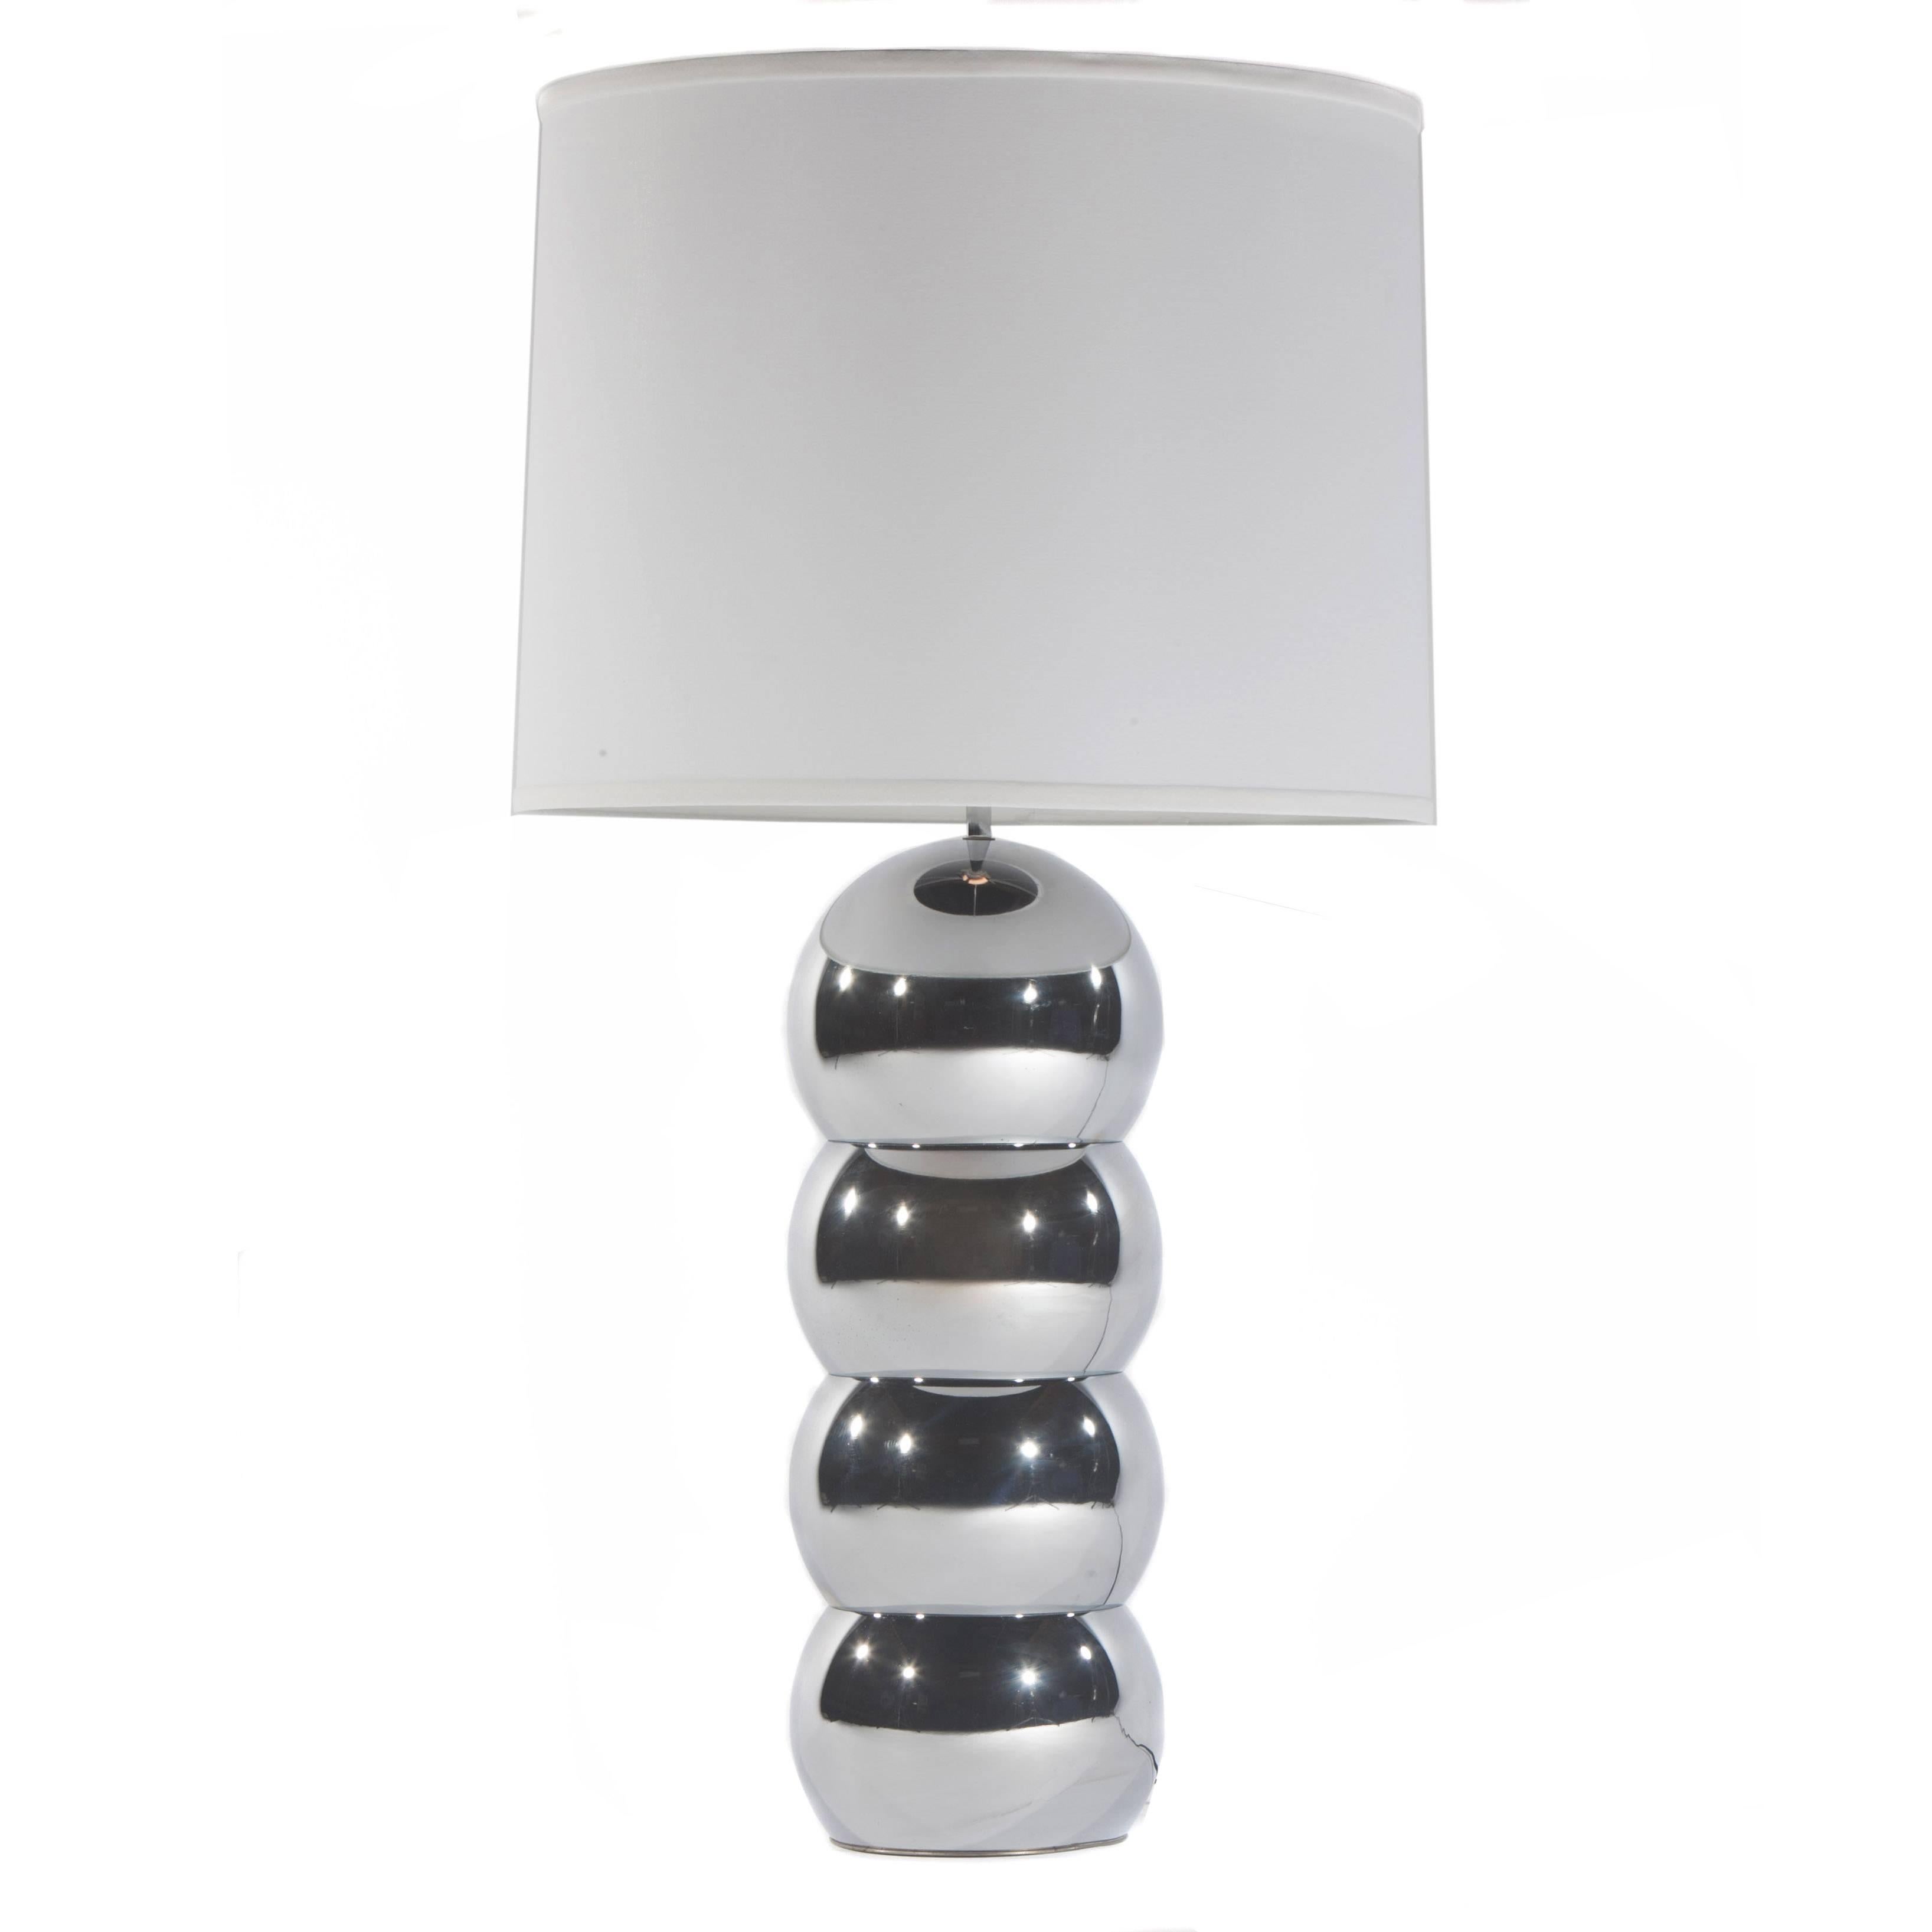 Pair of chrome stacked ball lamps by George Kovacs, circa 1970s. Classic design in great condition with new harps, linen shades and chrome finials. Takes one standard bulb; switch on neck. Overall 18.25